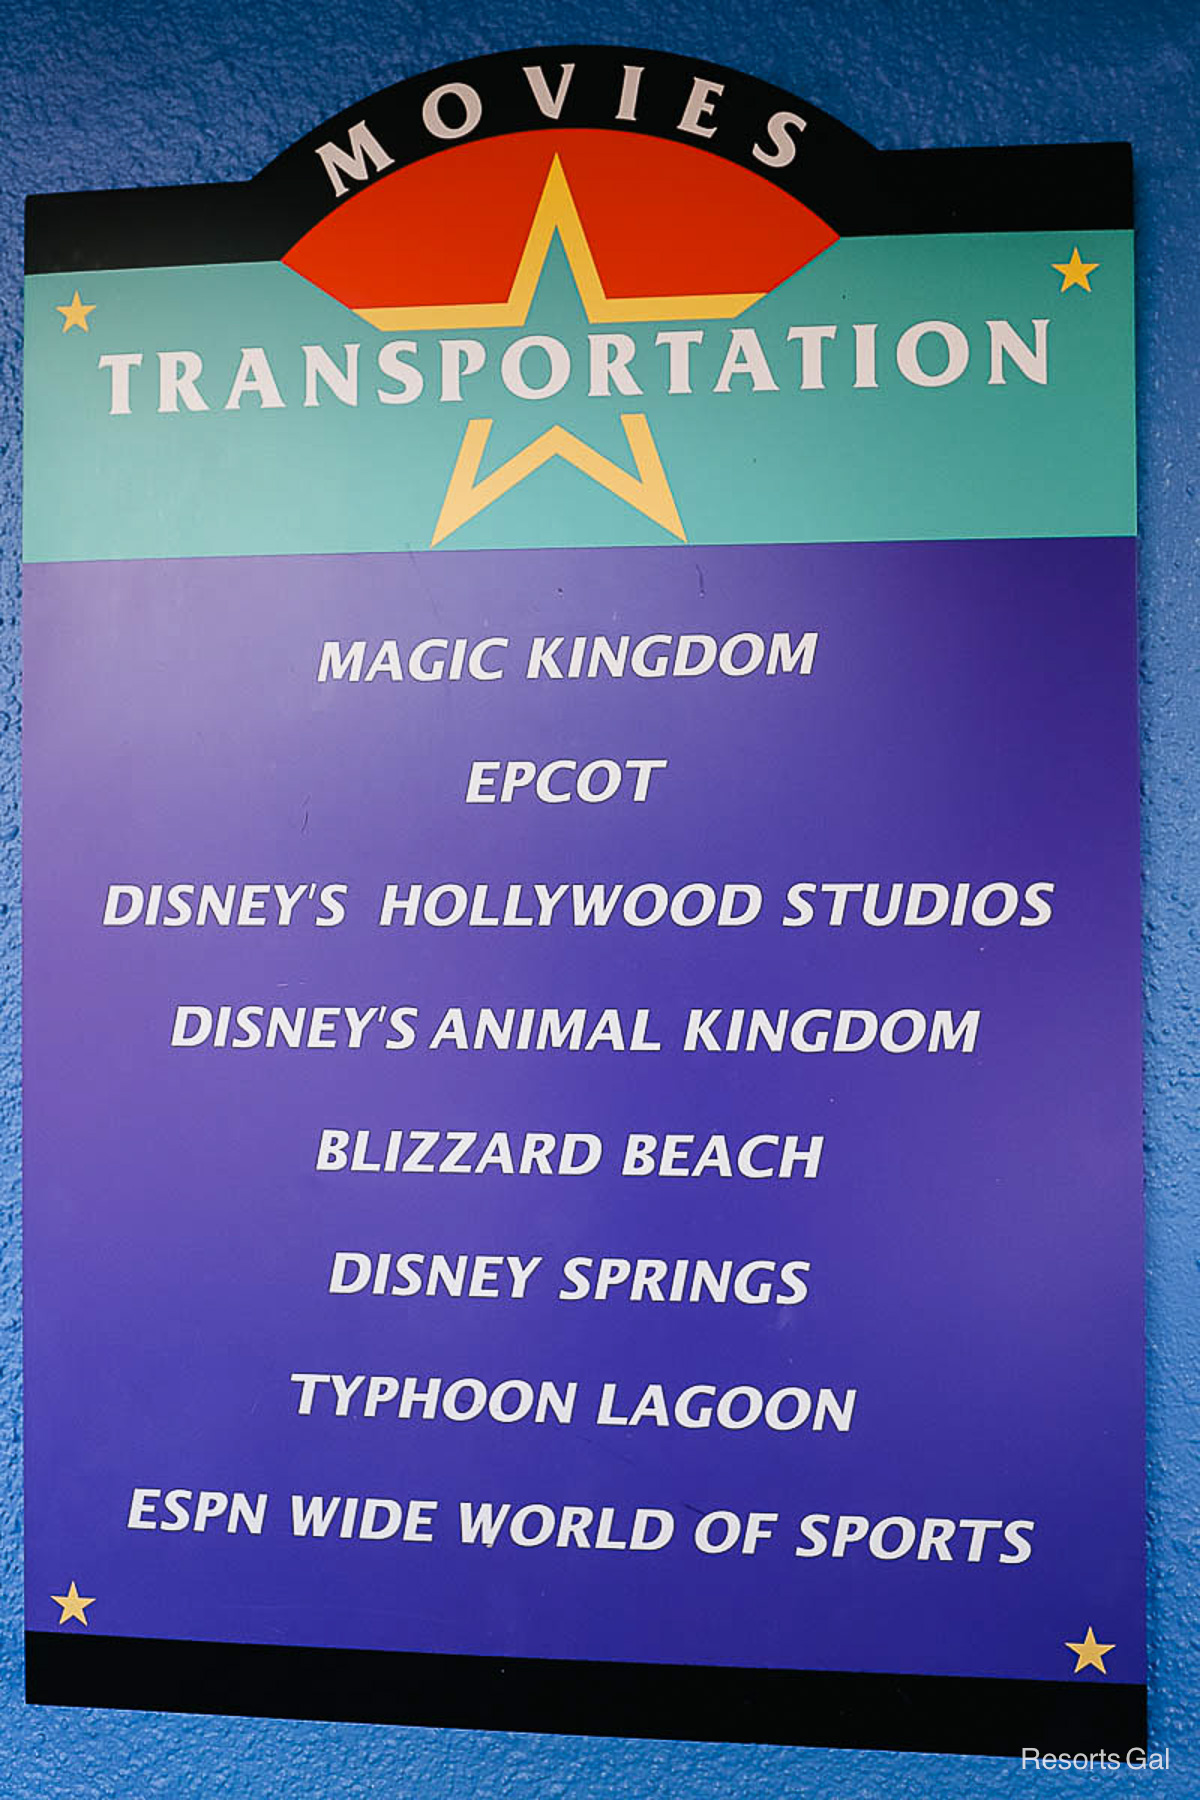 a sign that lists the transportation options at All-Star Movies 